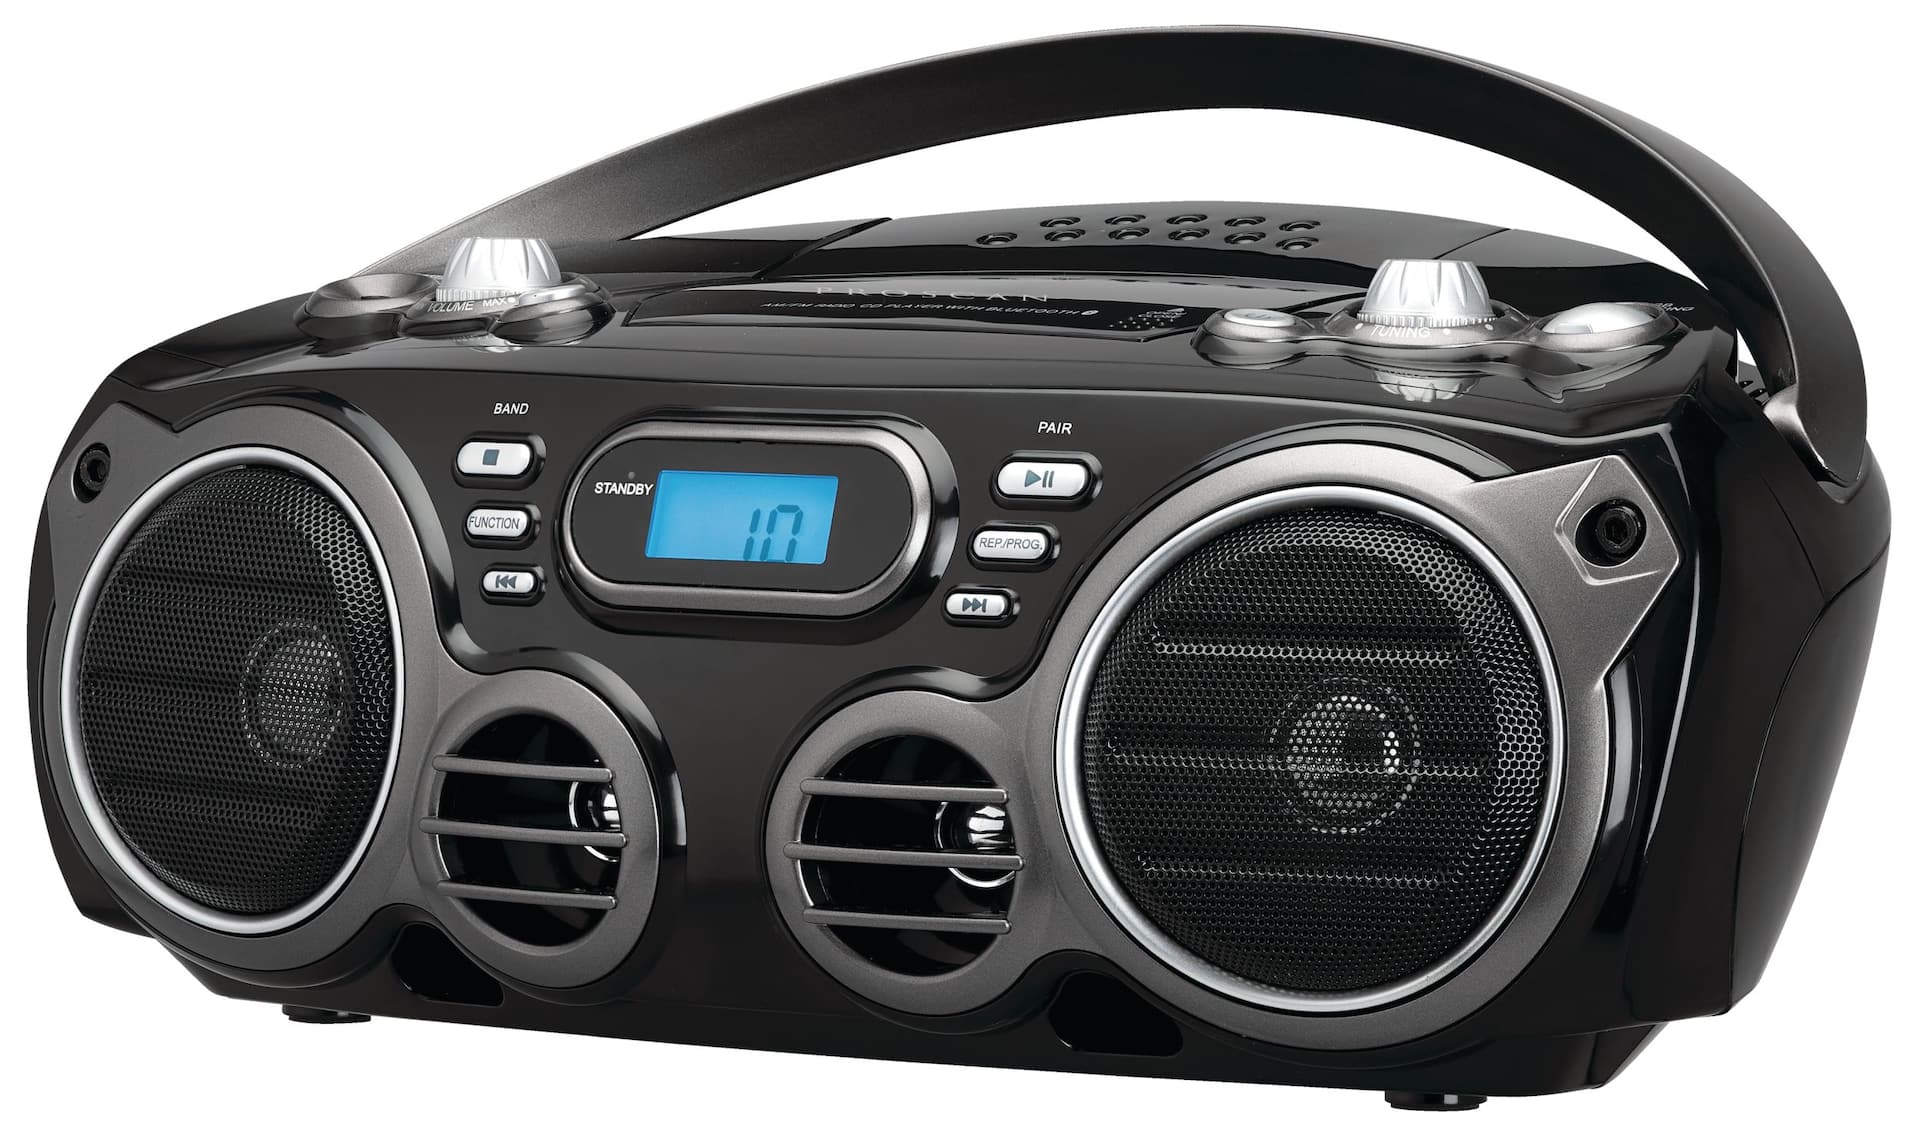 Proscan Portable Wireless Bluetooth CD Player Boombox Stereo w/ AM